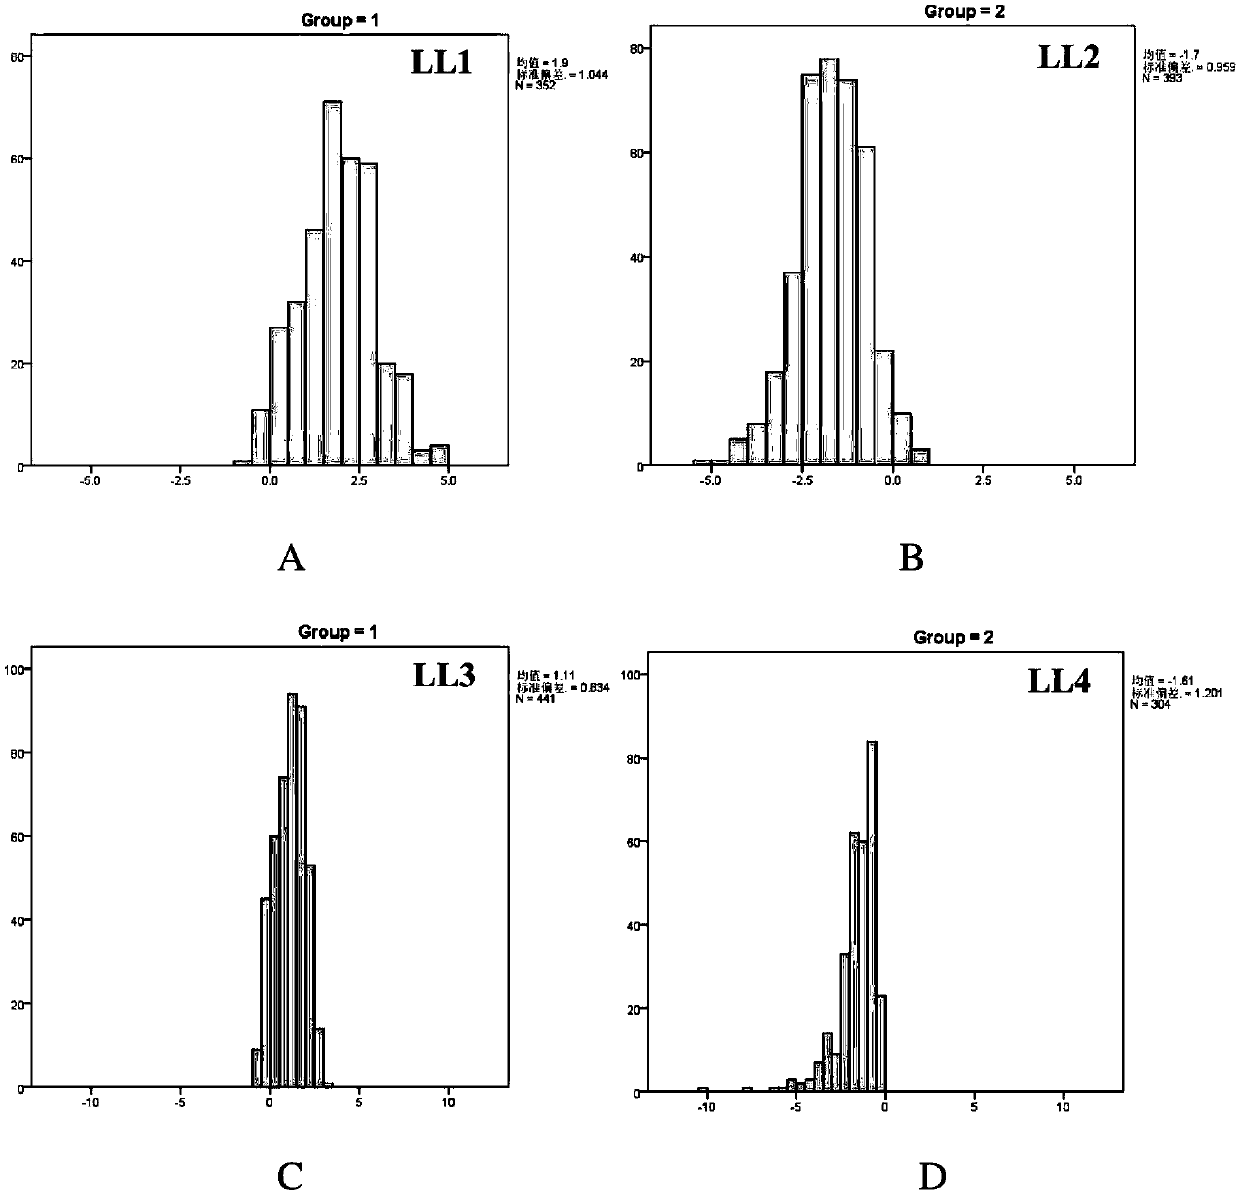 A Mathematical Model for Assessing Fertilization Ability of Landrace Boar and Its Establishment Method